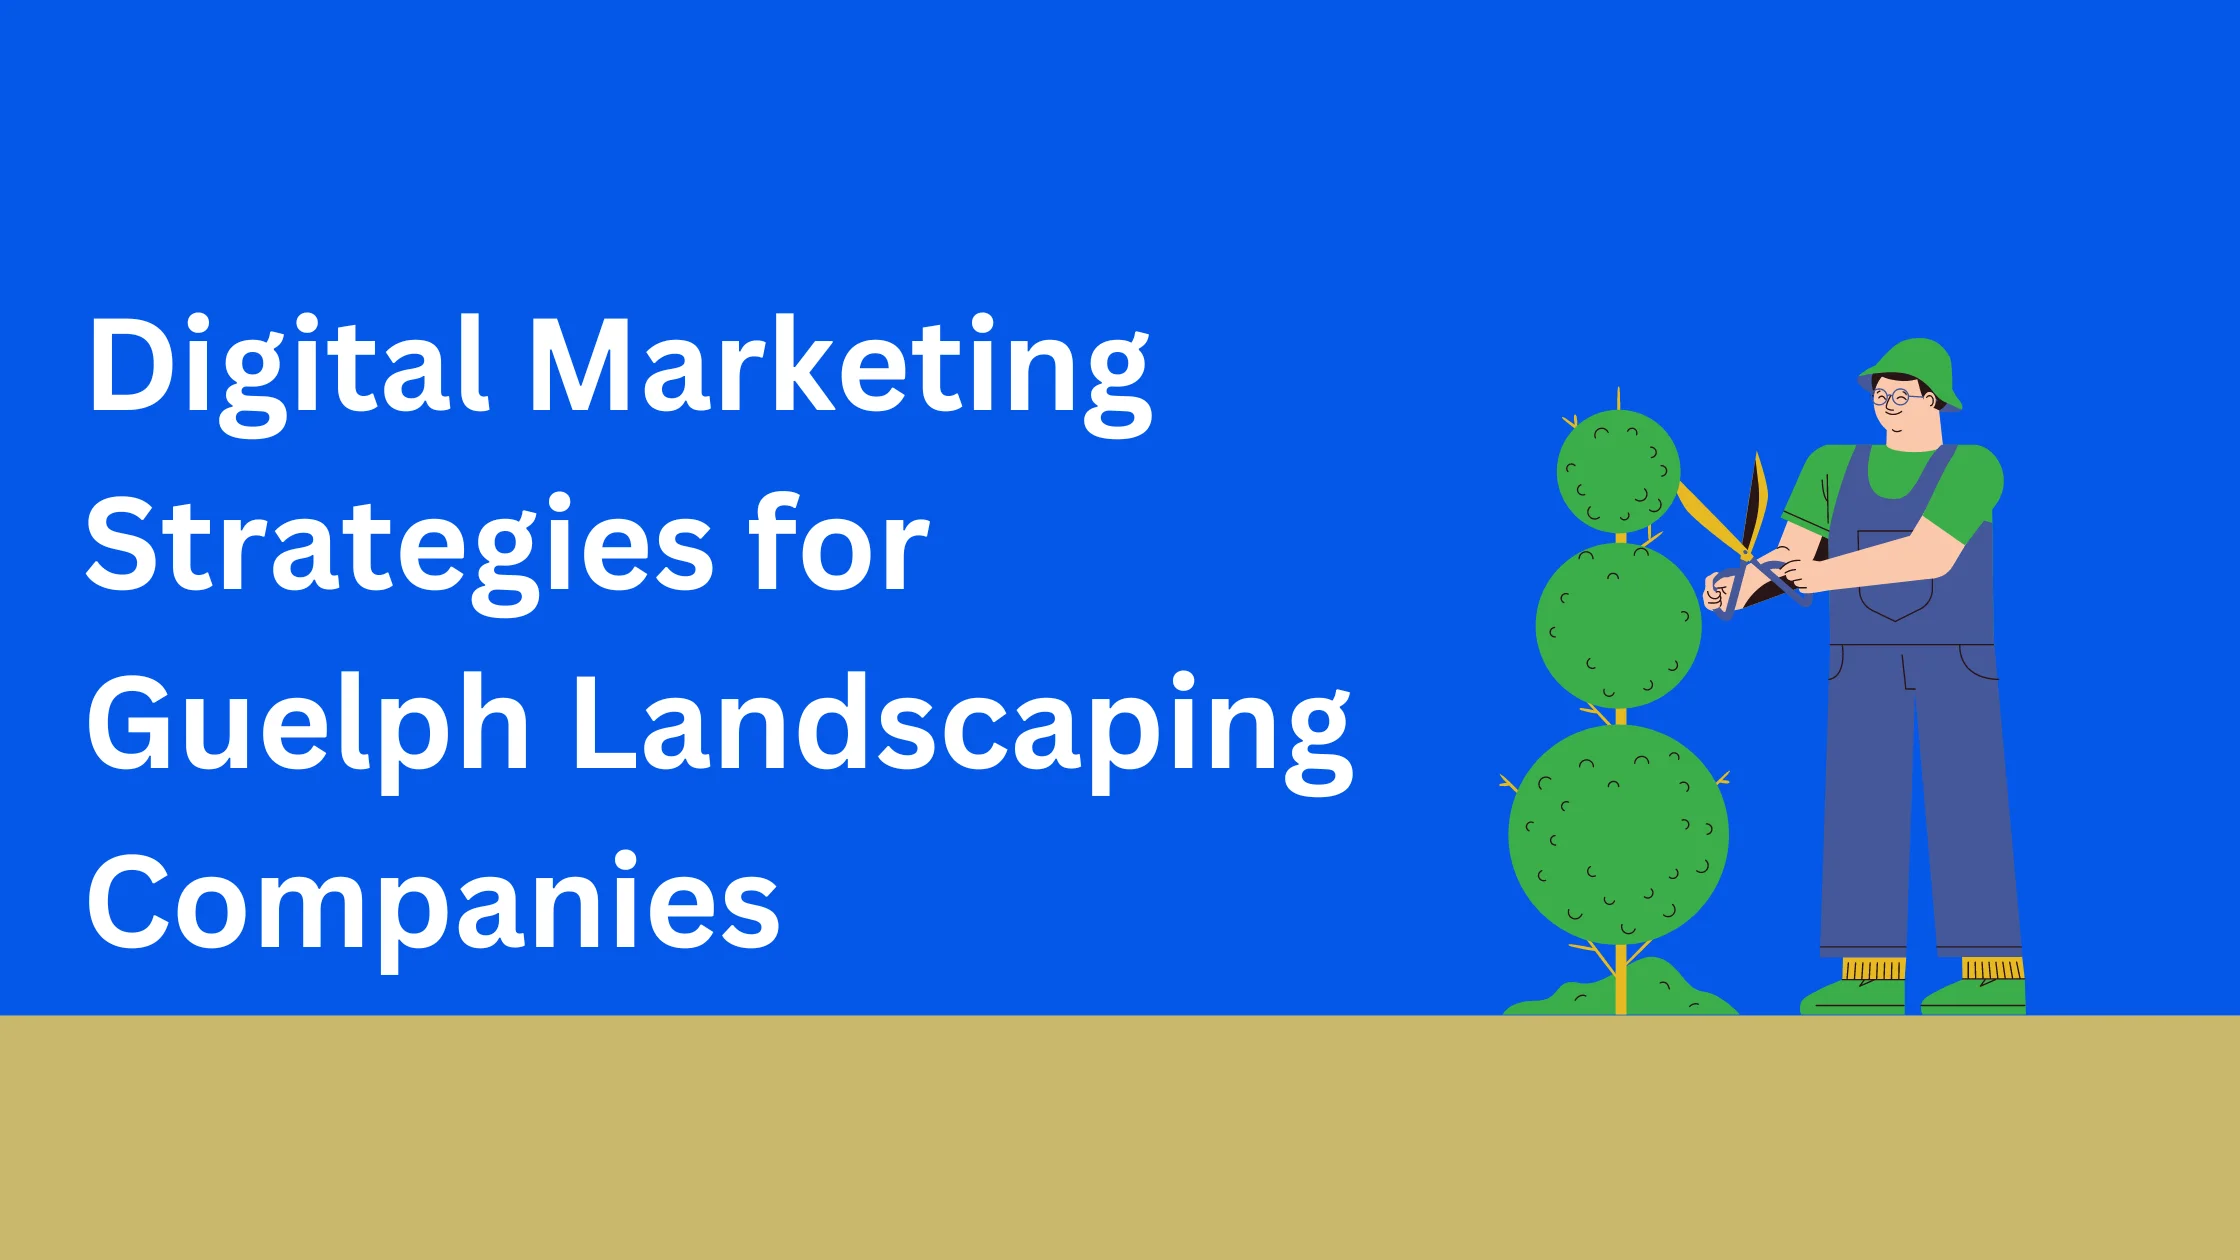 Digital Marketing Strategies for Guelph Landscaping Companies